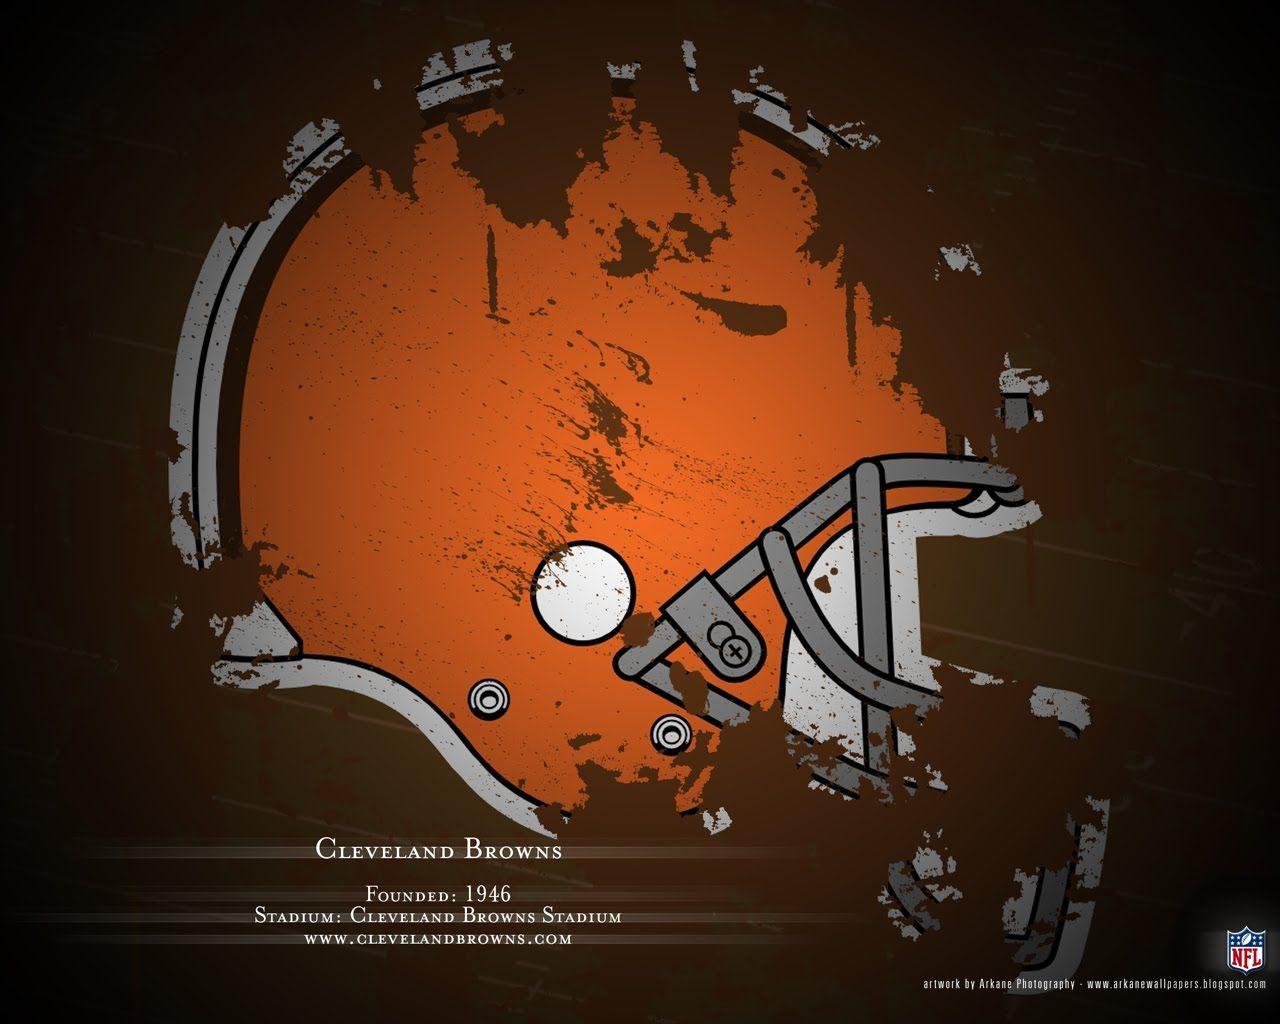 Cleveland Browns Wallpaper and Background Imagex1024